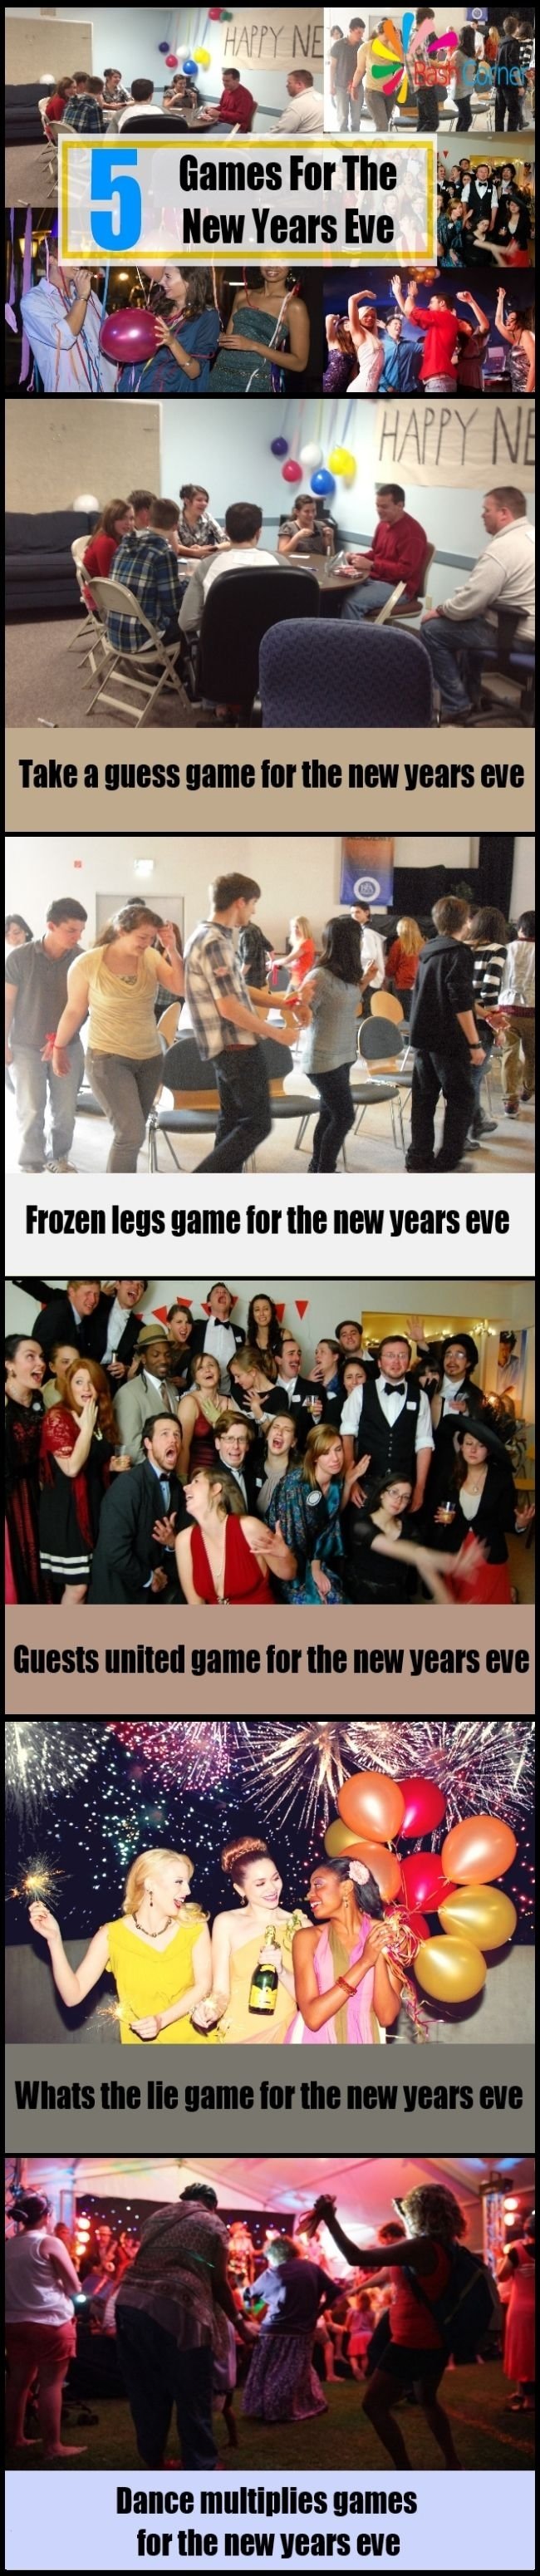 10 Most Recommended New Years Party Games Ideas new years party game ideas wedding 1 2022